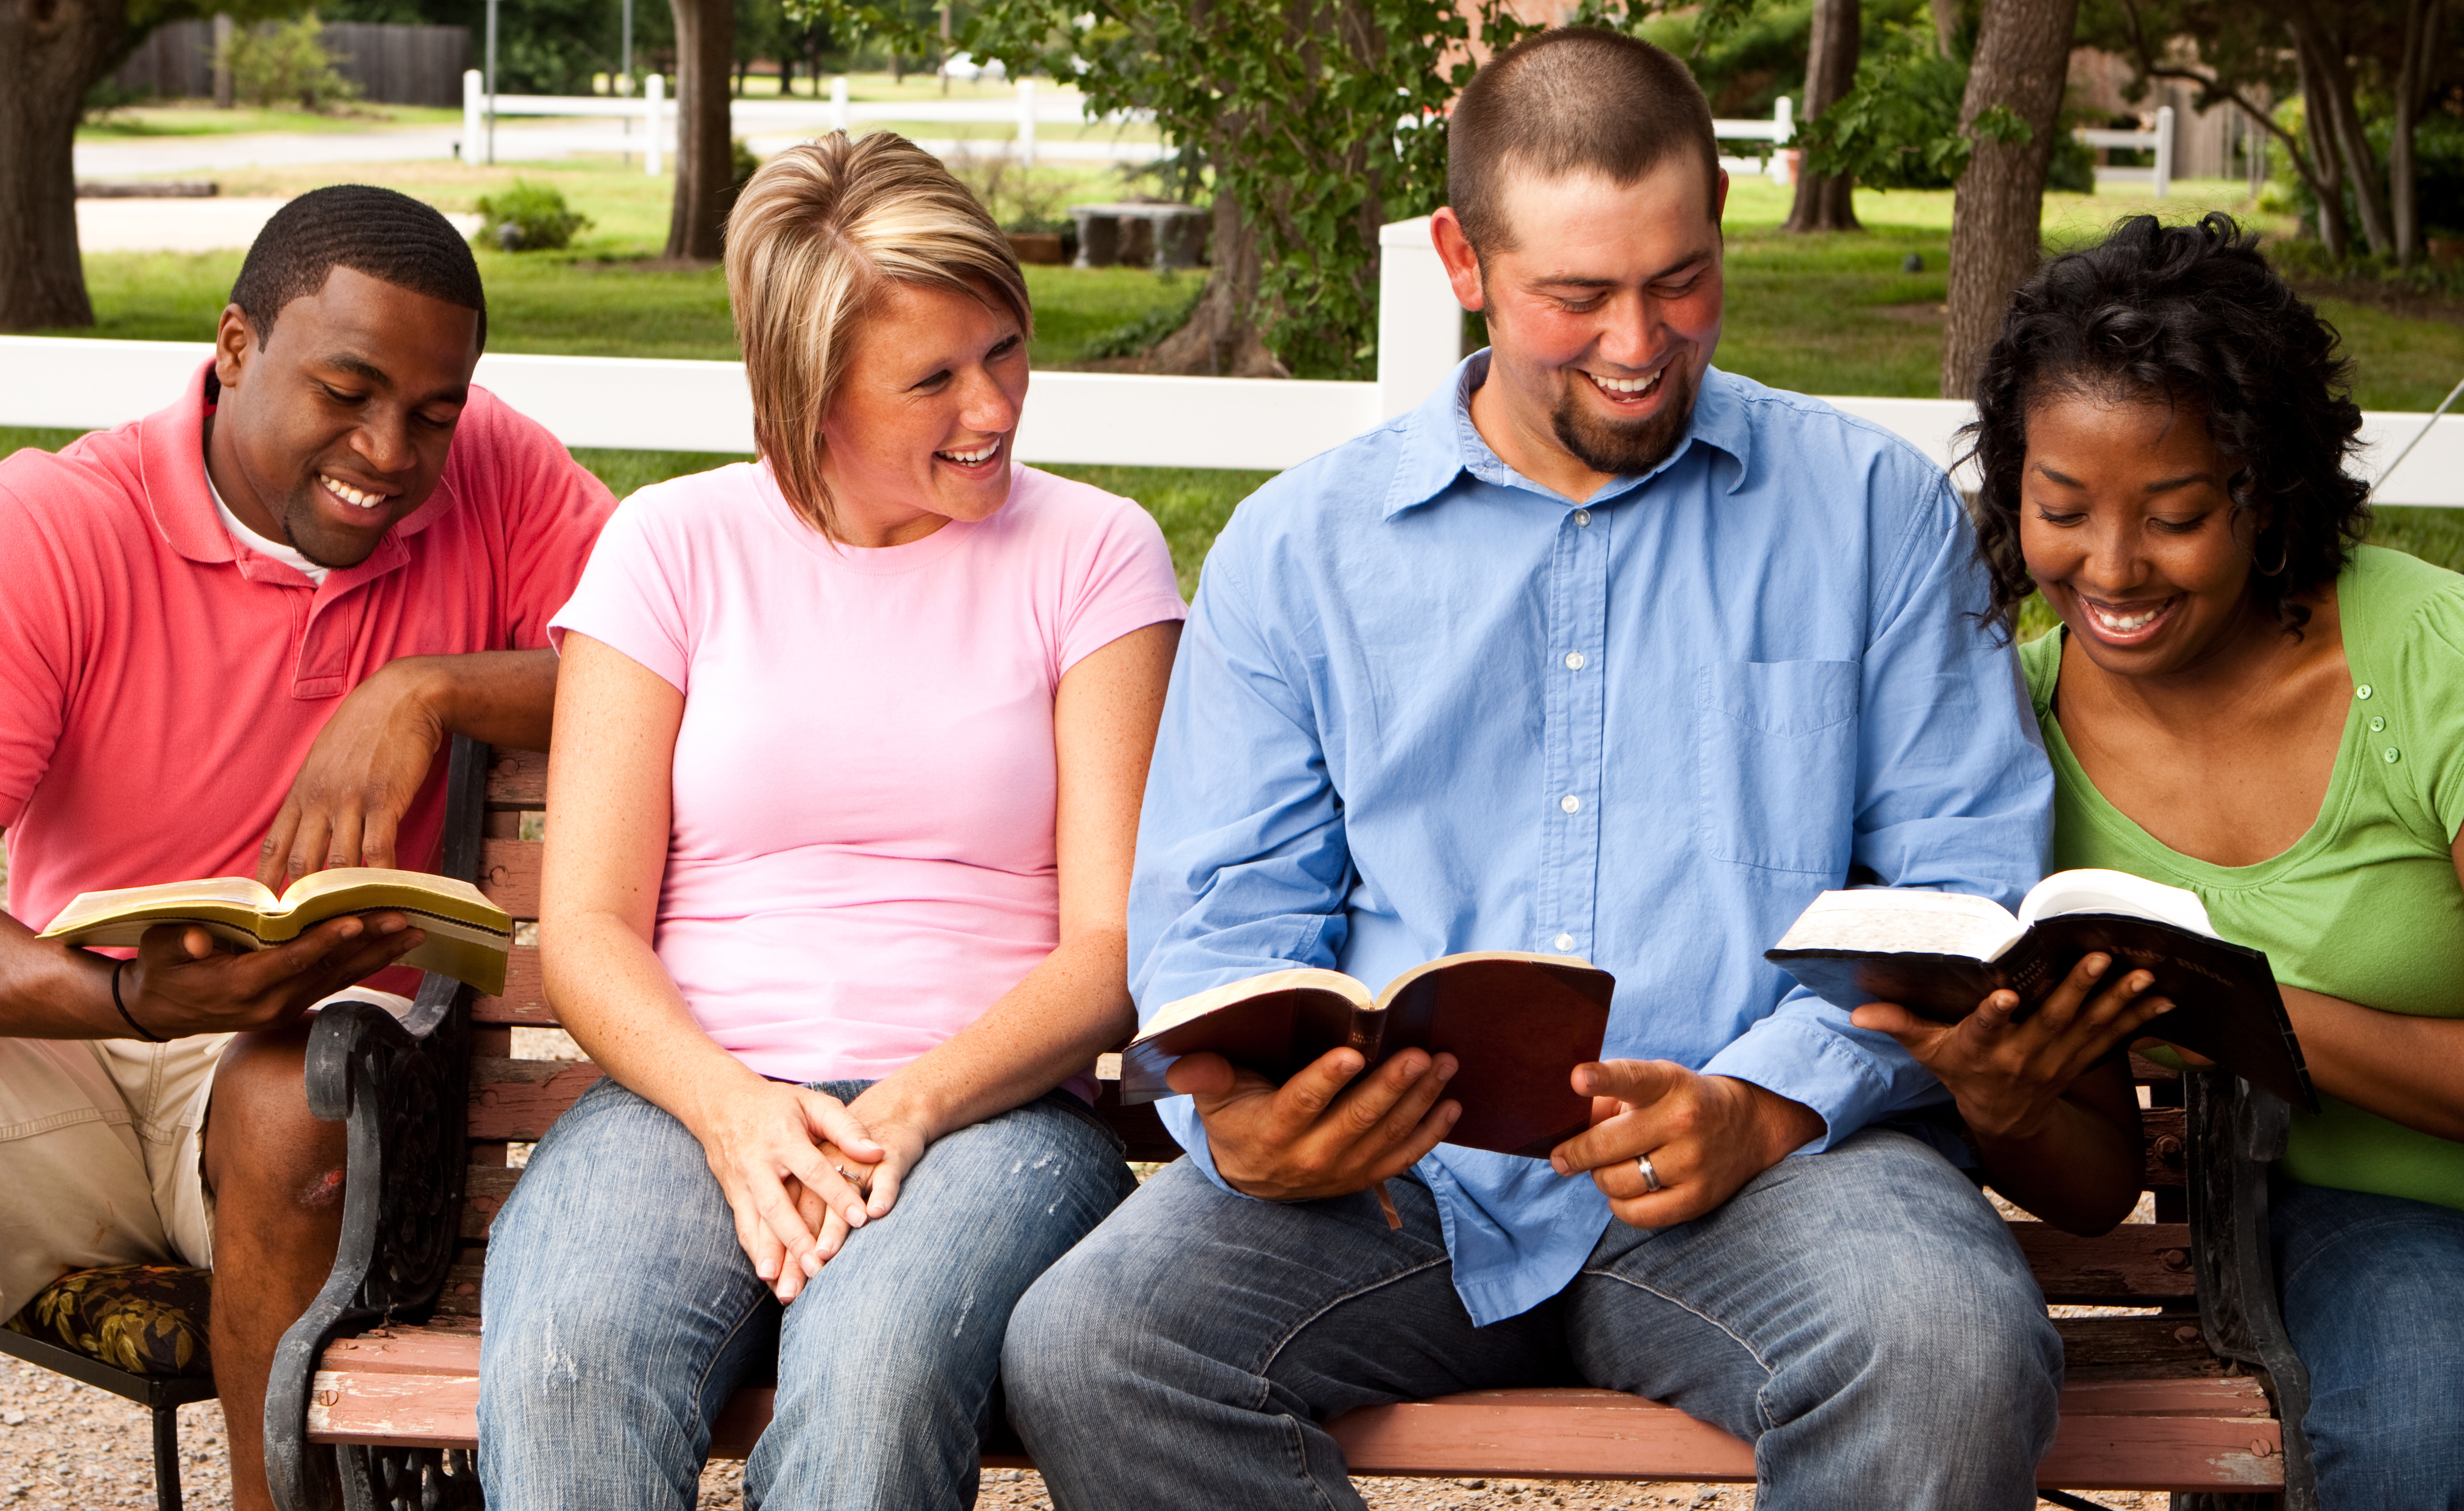 Getty images stock photo of four adults in Bible study on park bench